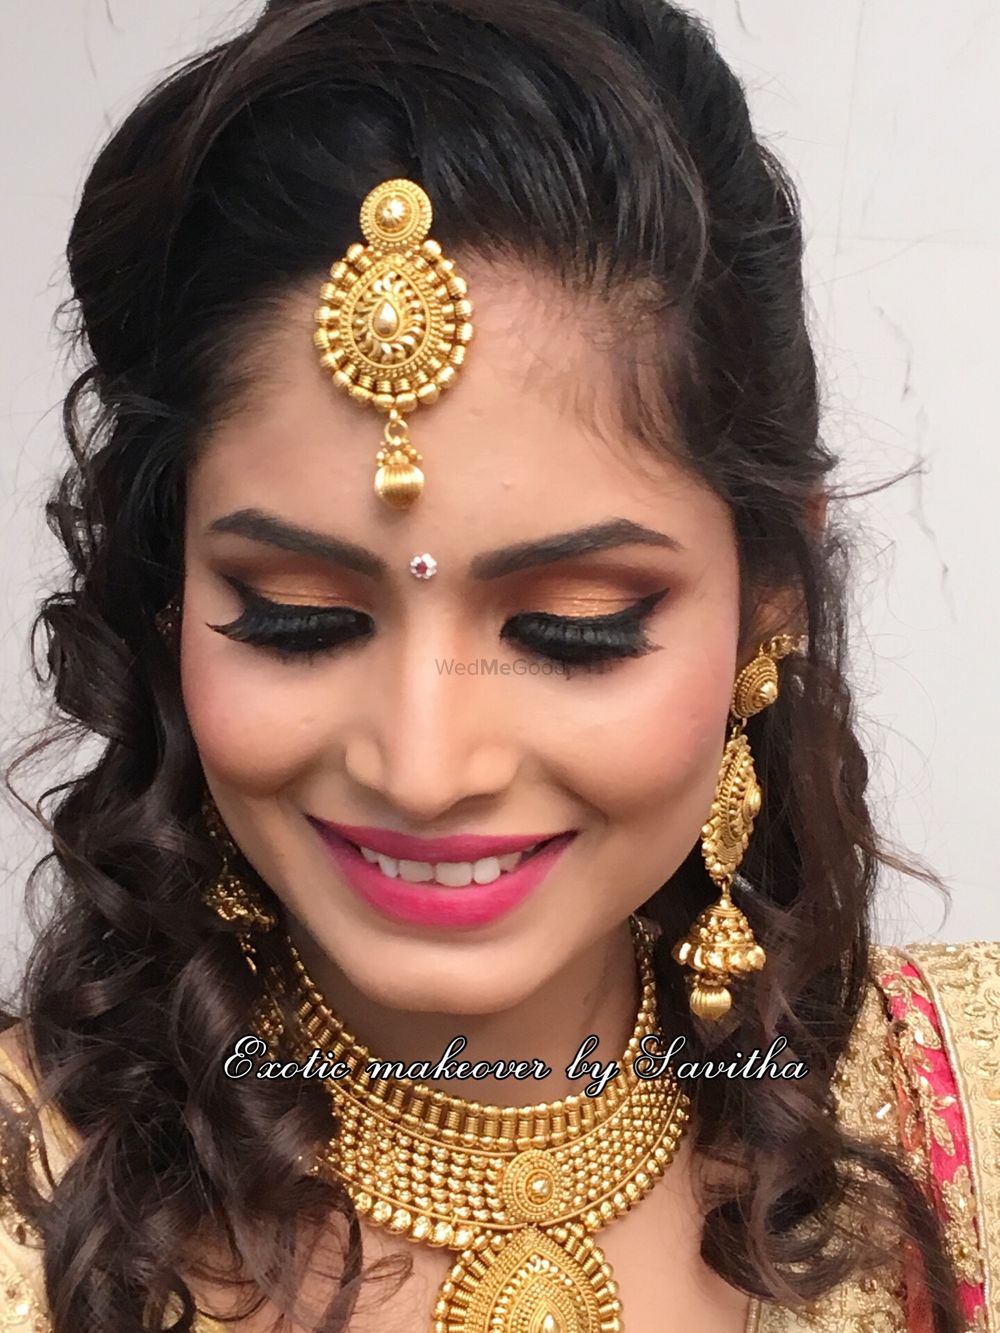 Photo From Exotic makeovers - By Exotic makeover by Savitha 